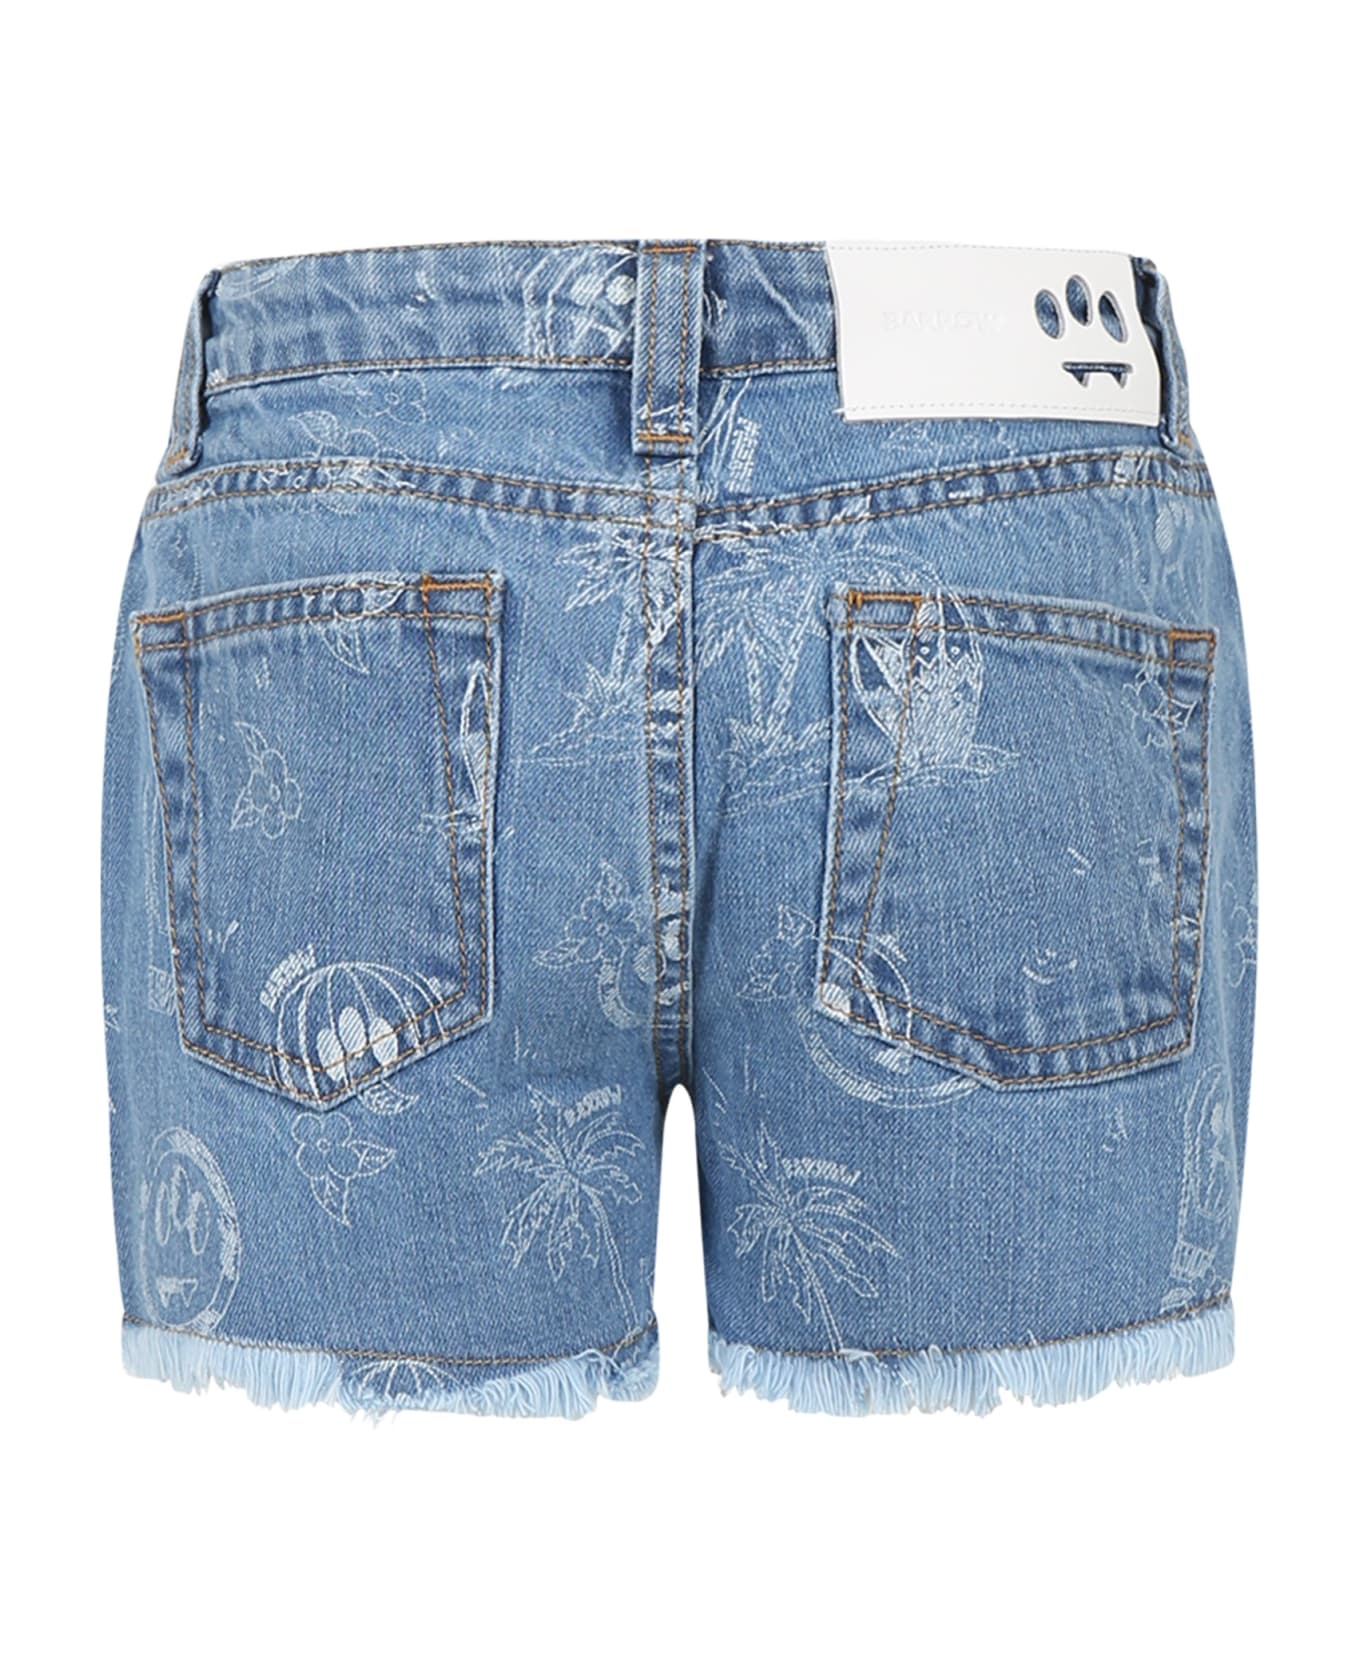 Barrow Light Blue Shorts For Girl With Logo And Iconic Smiley - Denim